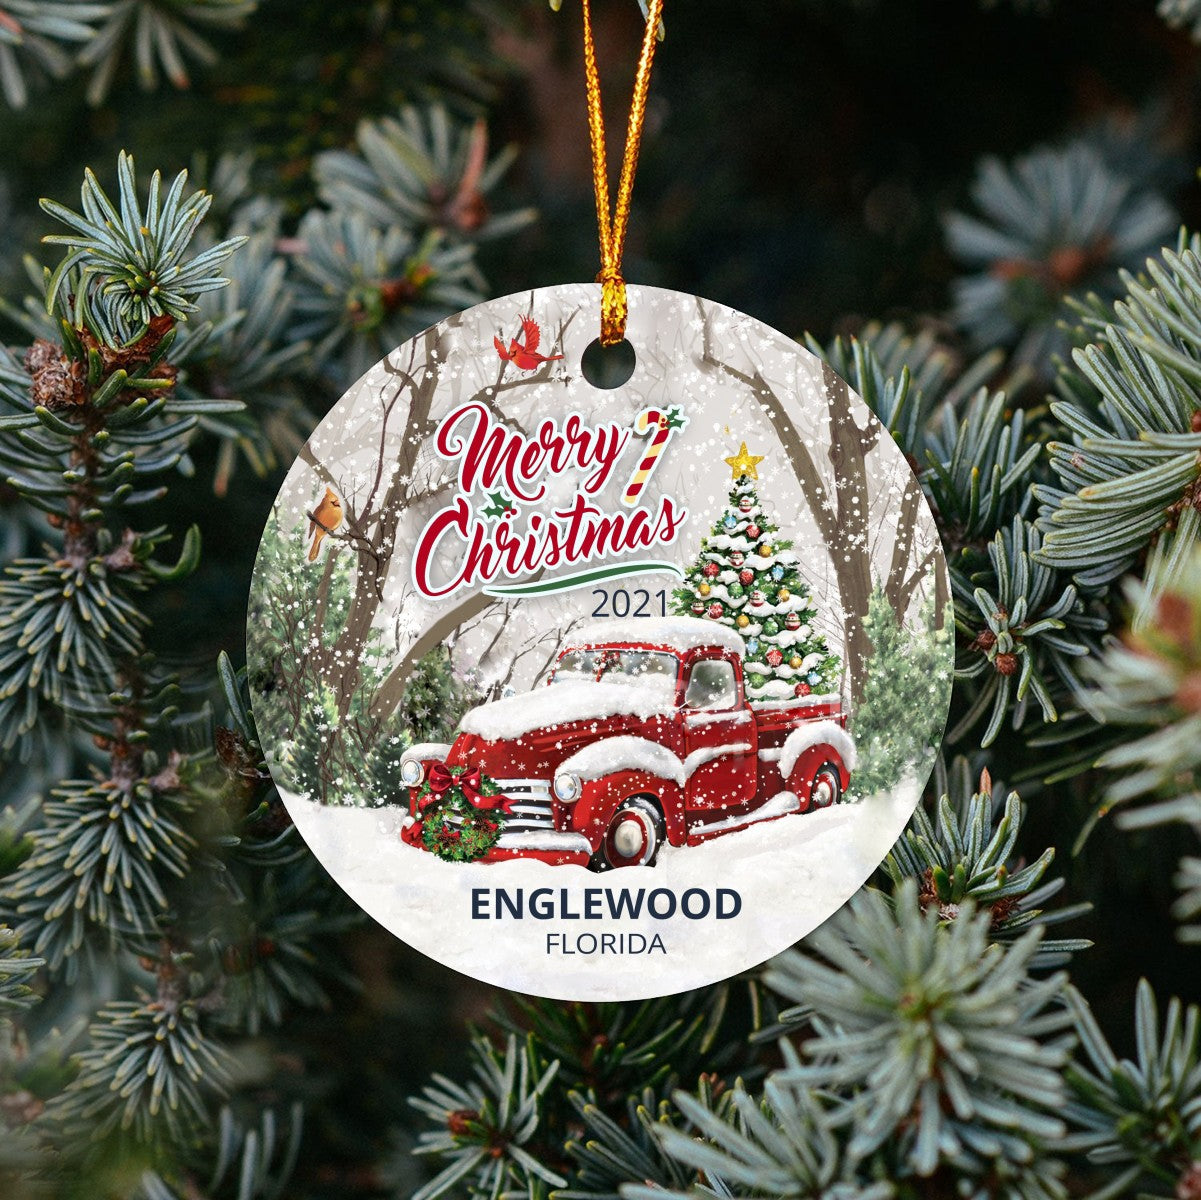 Christmas Tree Ornaments Englewood - Ornament With Name City, State Englewood Florida FL Ornament - Red Truck Xmas Ornaments 3'' Plastic Gift For Family, Friend And Housewarming